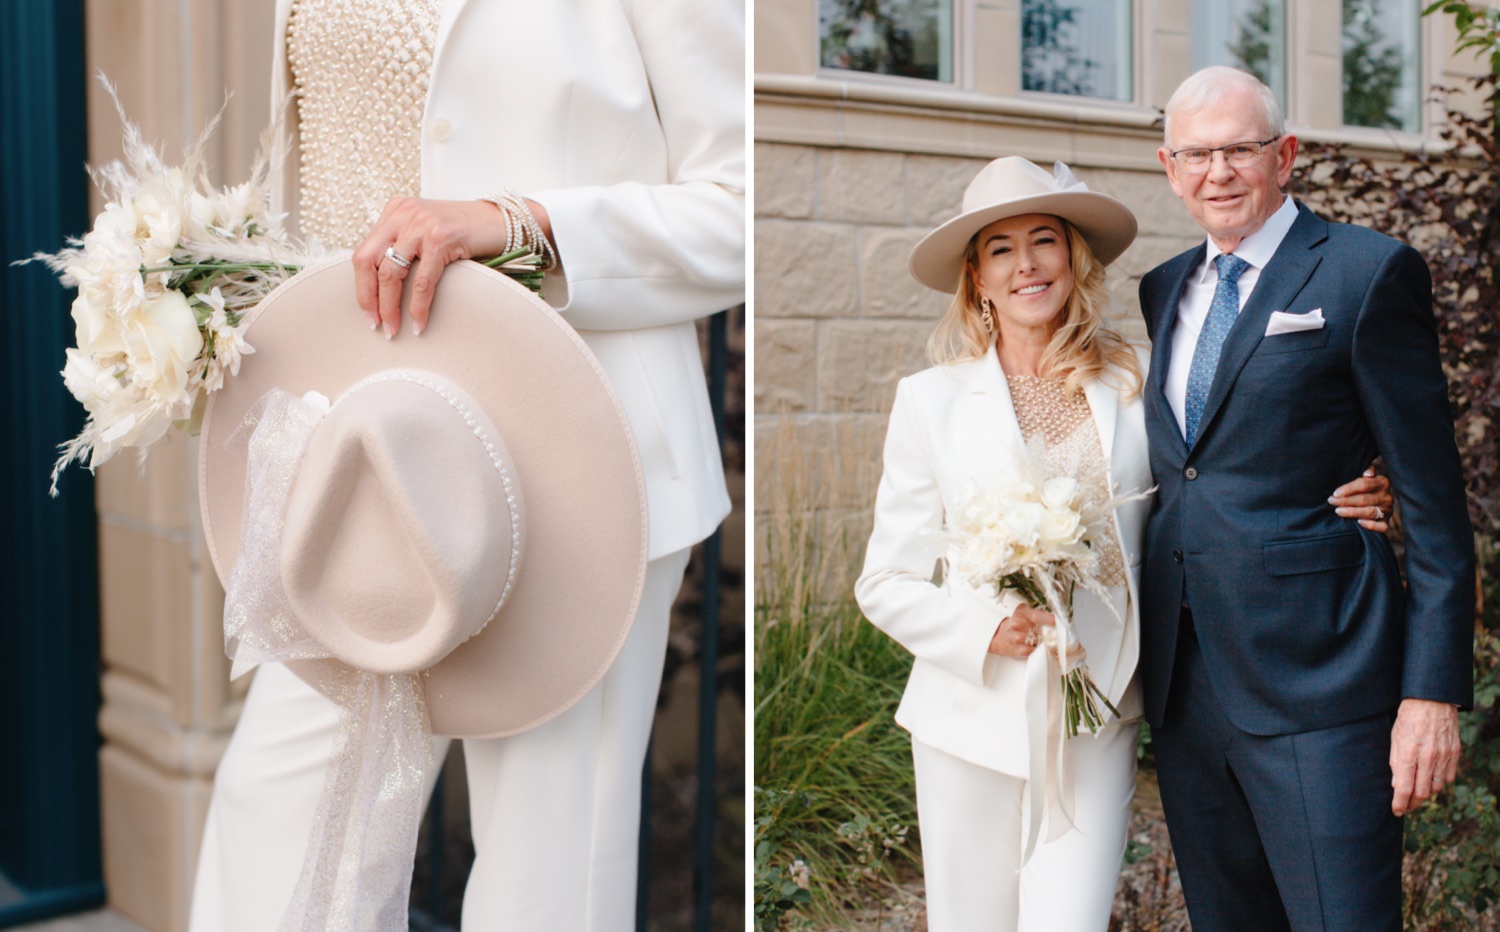 Stylish hat, white florals and gold detail accents bridal style